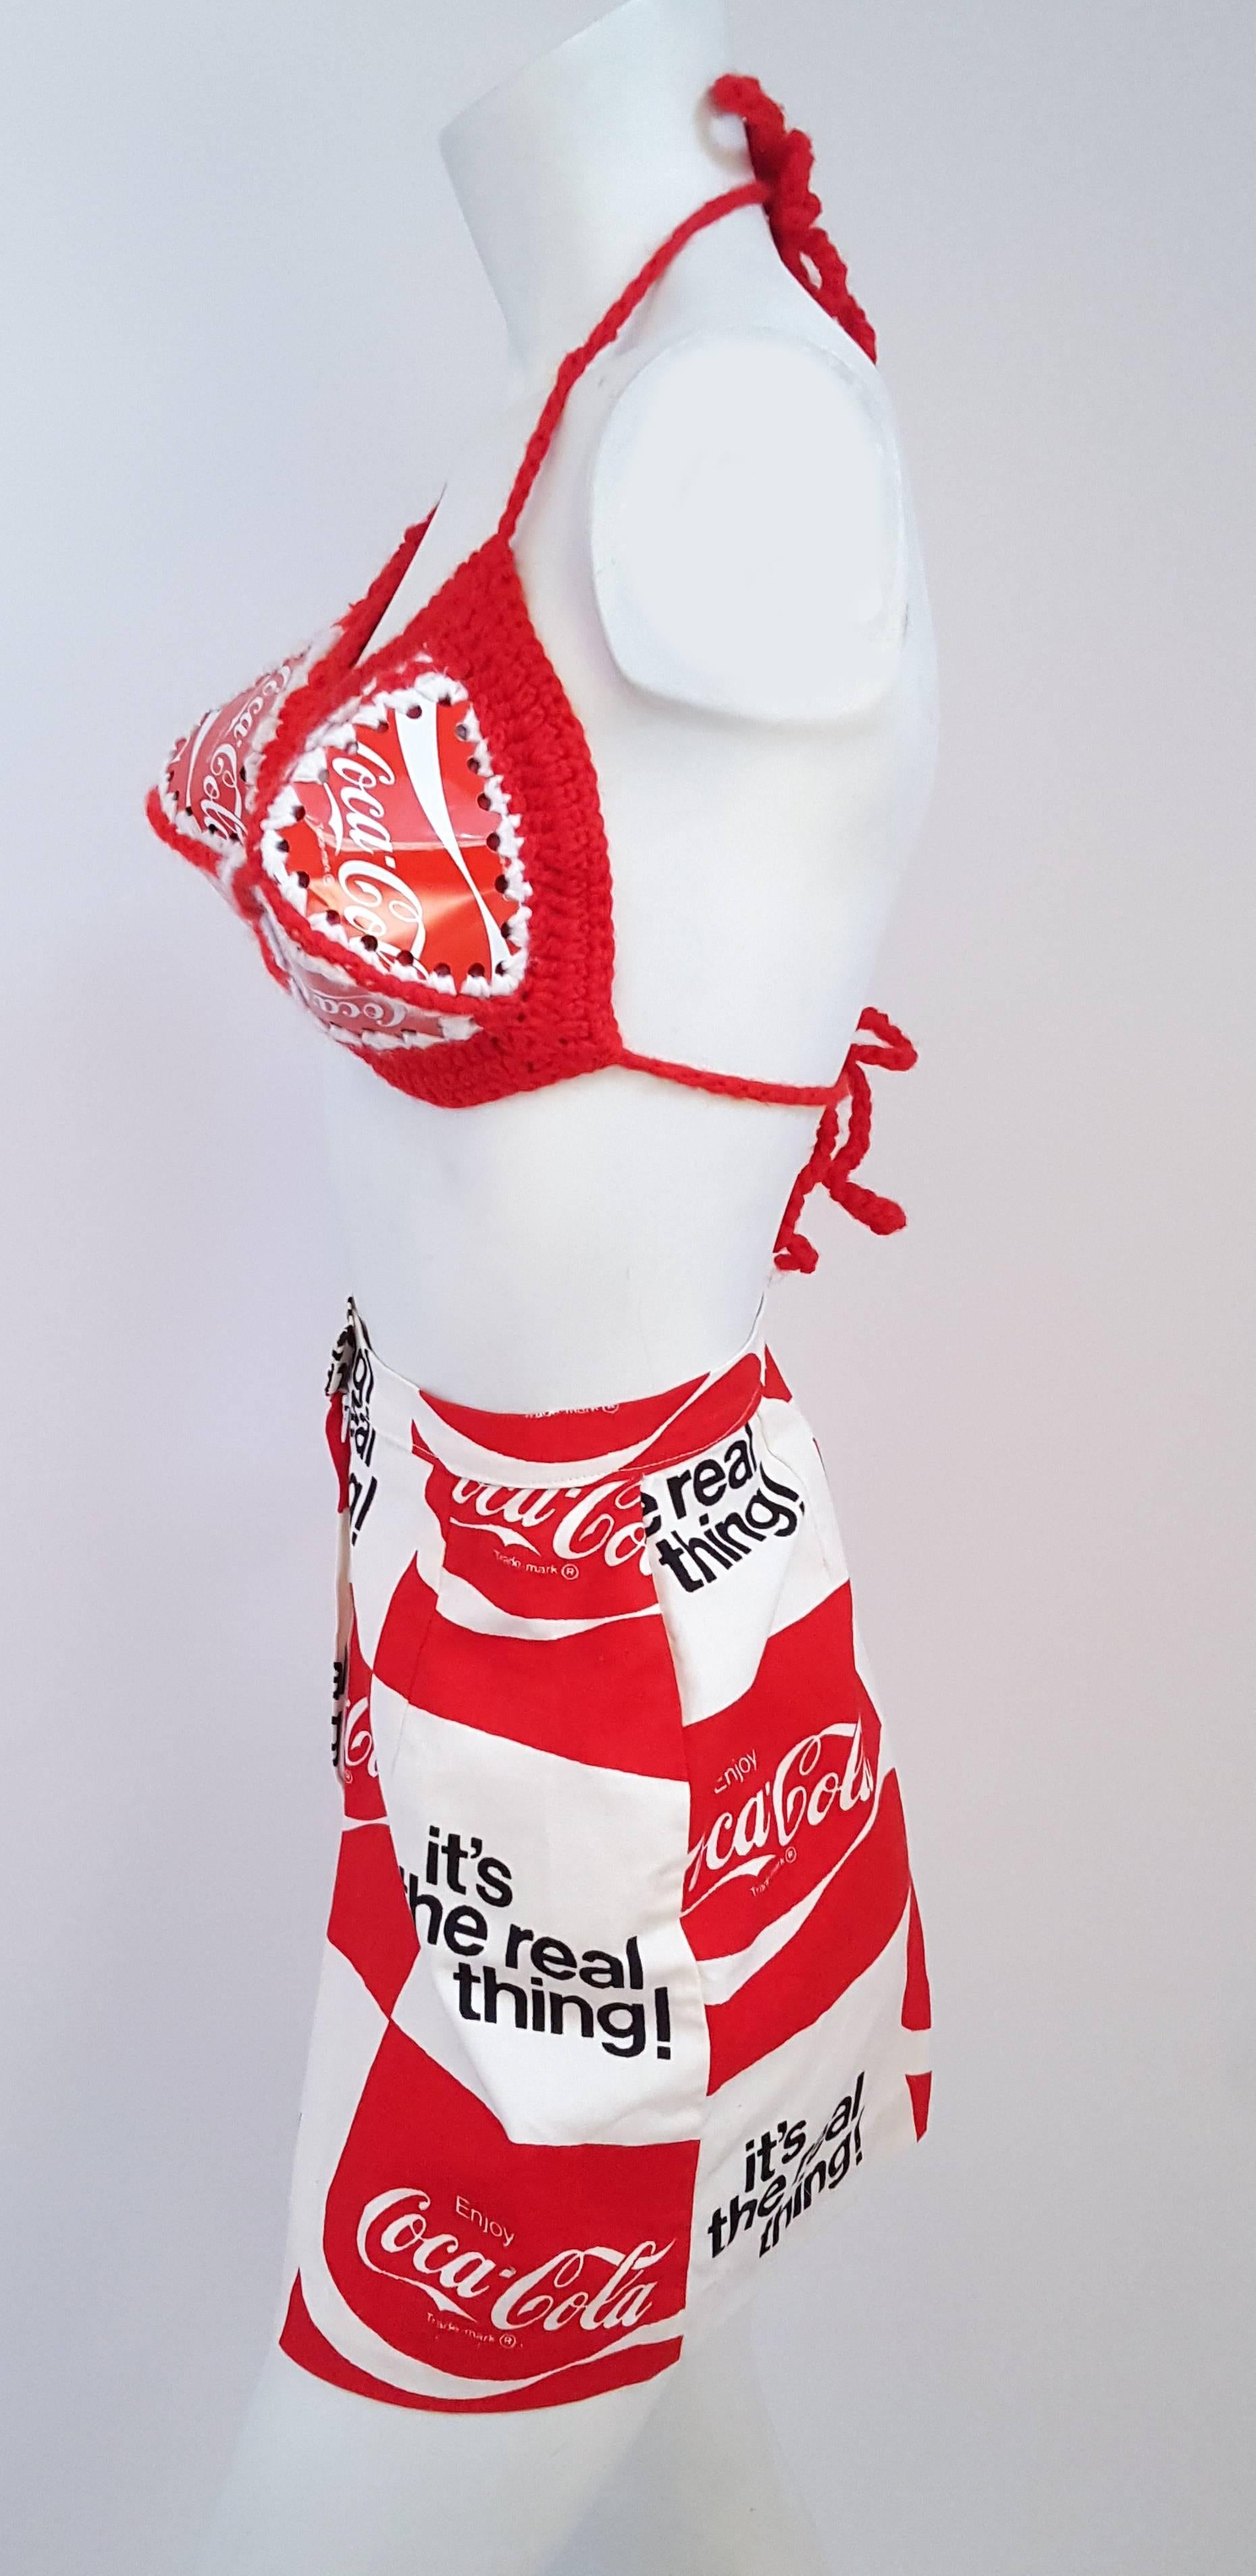 60s Pop Art Coca Cola Wearable Art Bikini and Shorts. Bikini top made from vintage Coca Cola cans and crocheted yarn lining. Cotten print shorts. 